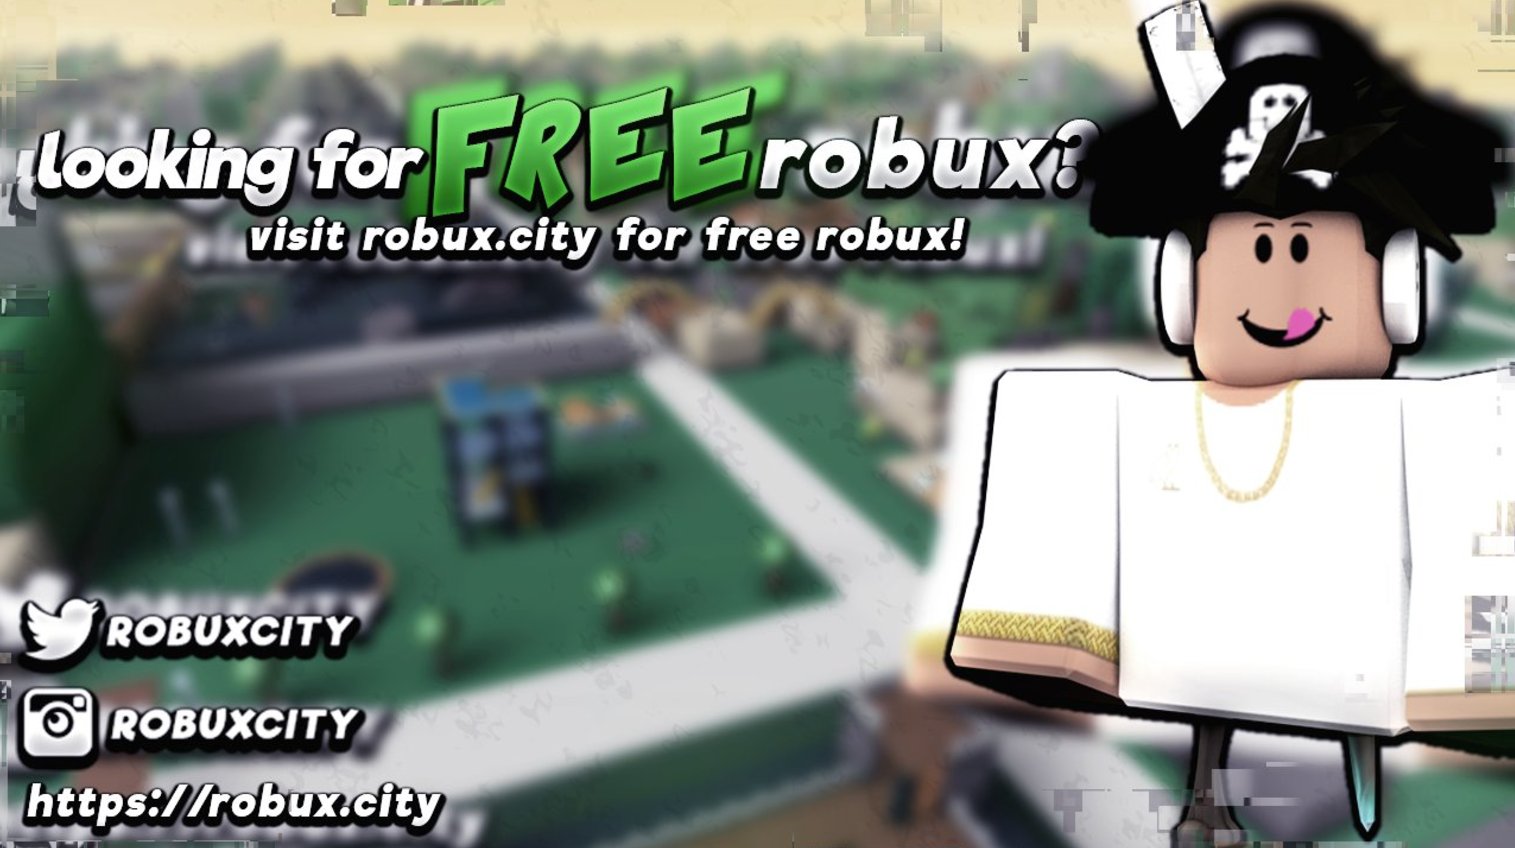 Claimrbx On Twitter Want Free Robux Visit Https T Co